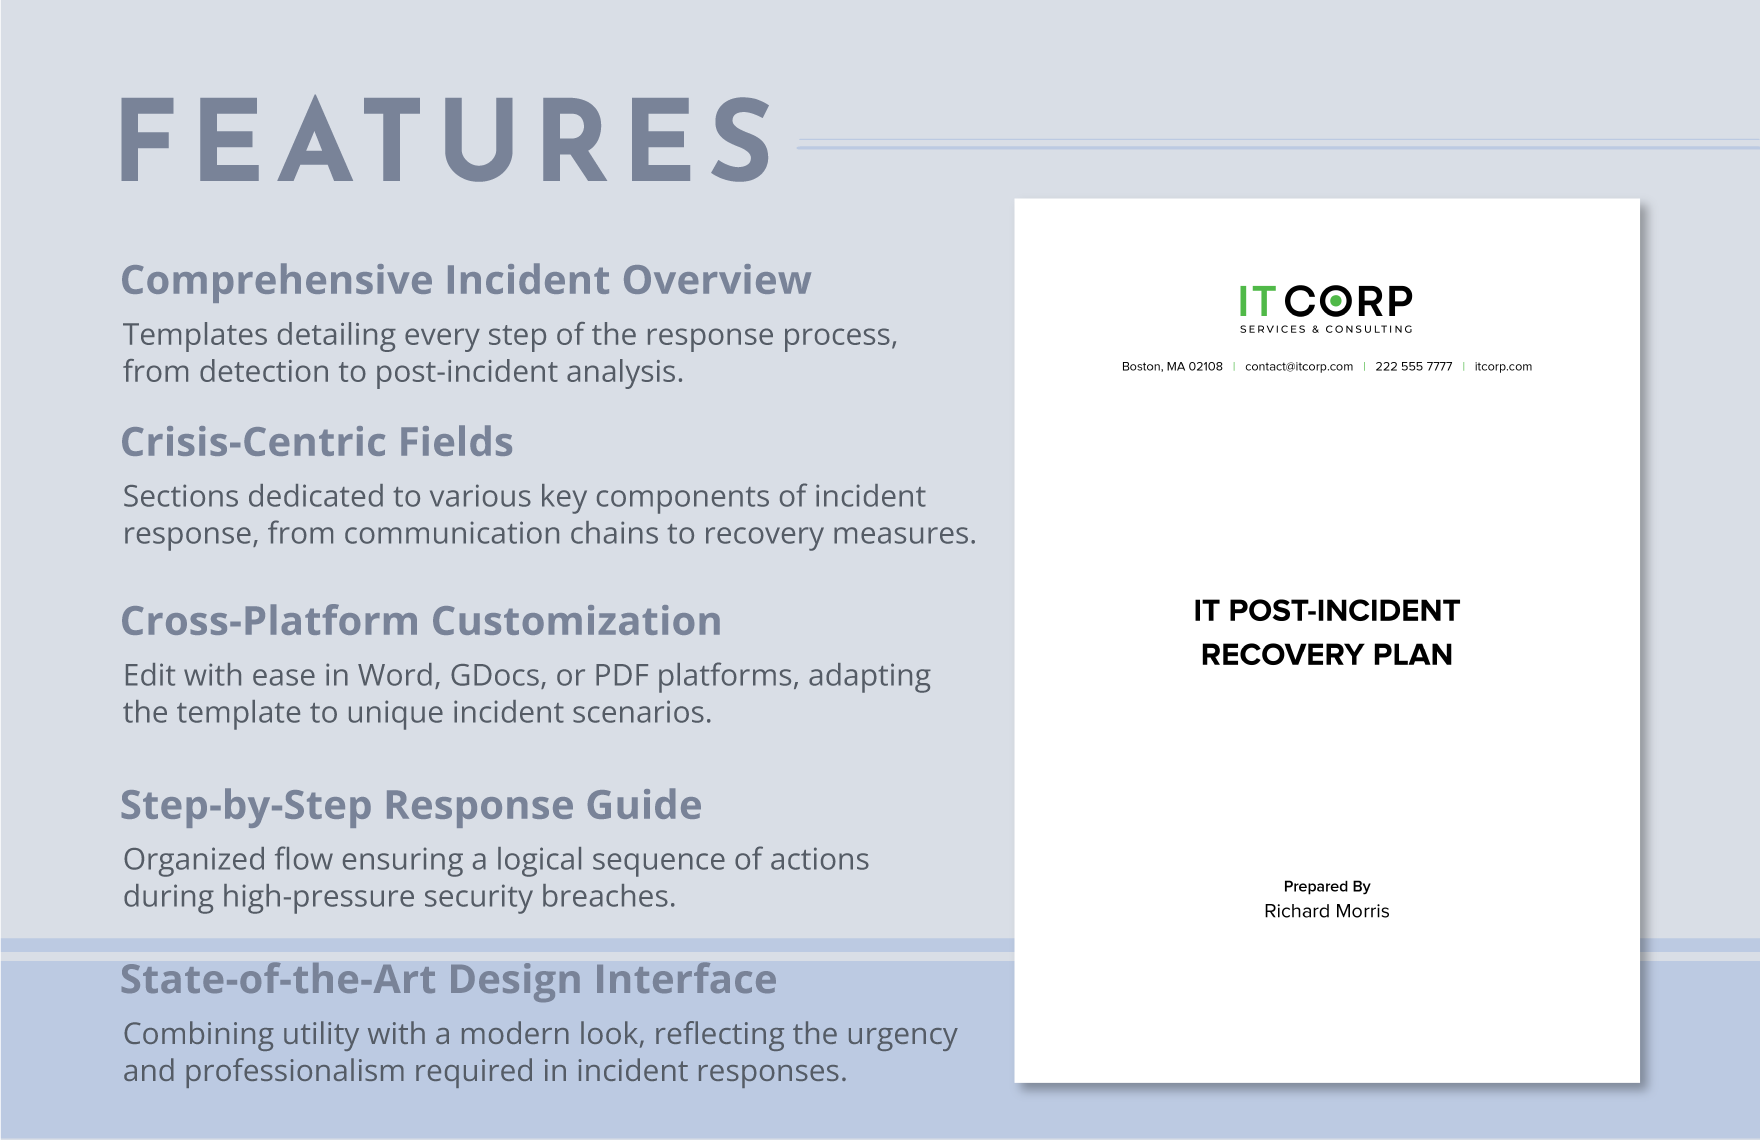 IT Post-Incident Recovery Plan Template